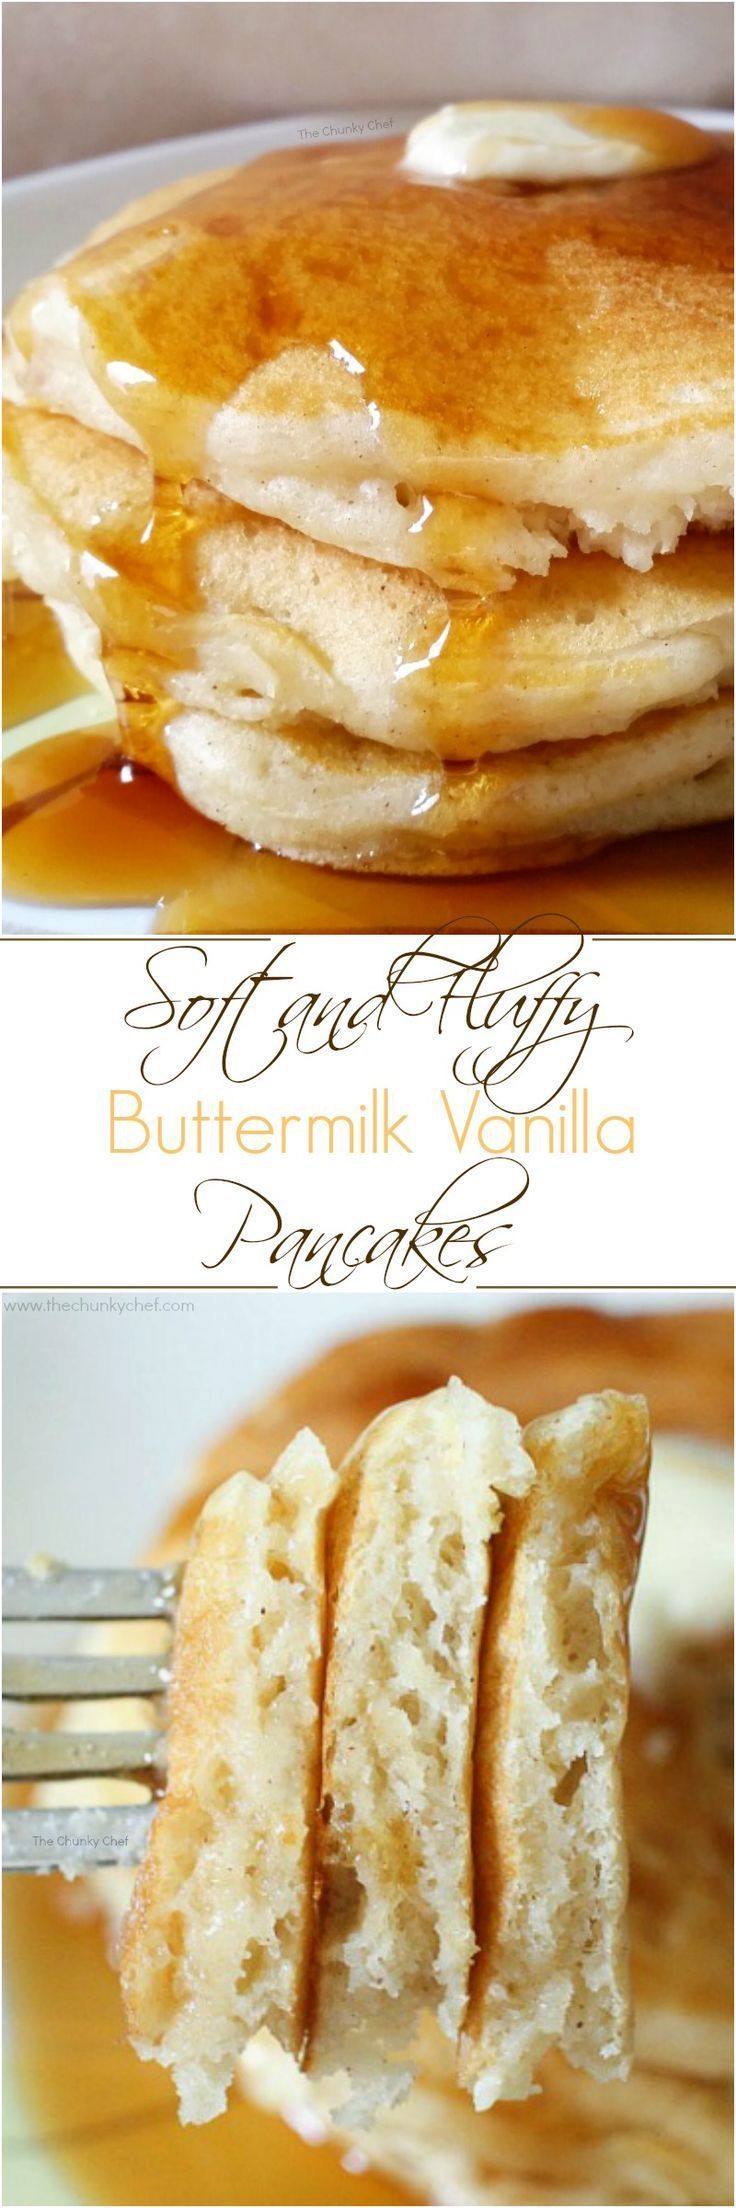 The softest, fluffiest, best buttermilk pancakes… from scratch!  Savor the sweet hints of vanilla and warmth of the cinnamon;